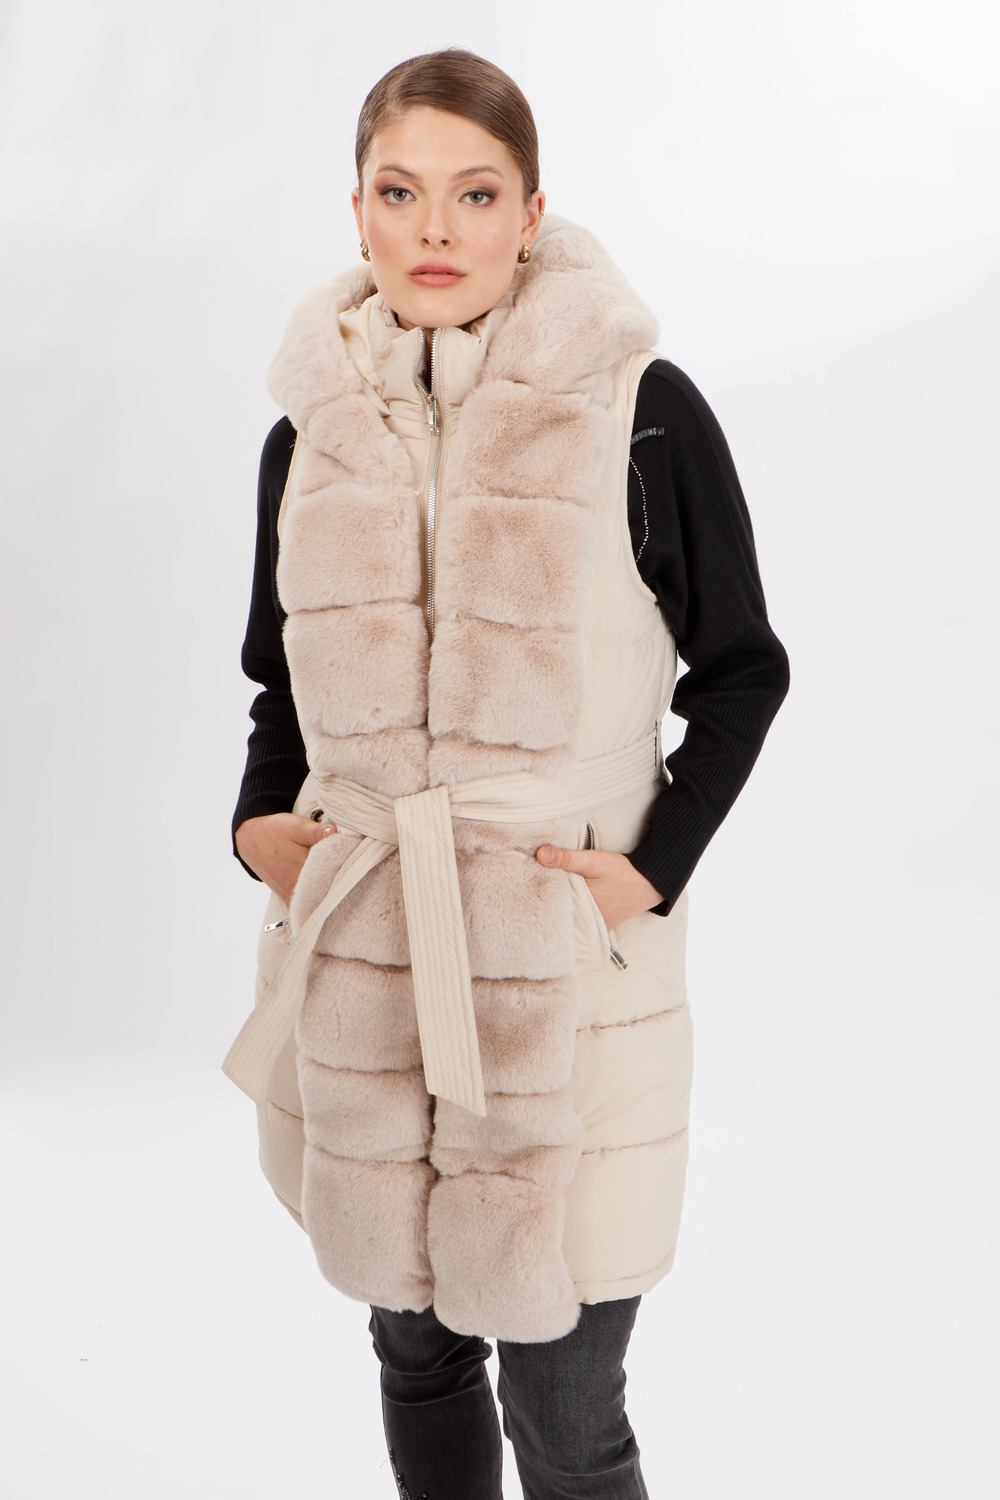 Quilted Sleeveless Vest Style 234131U. Beige